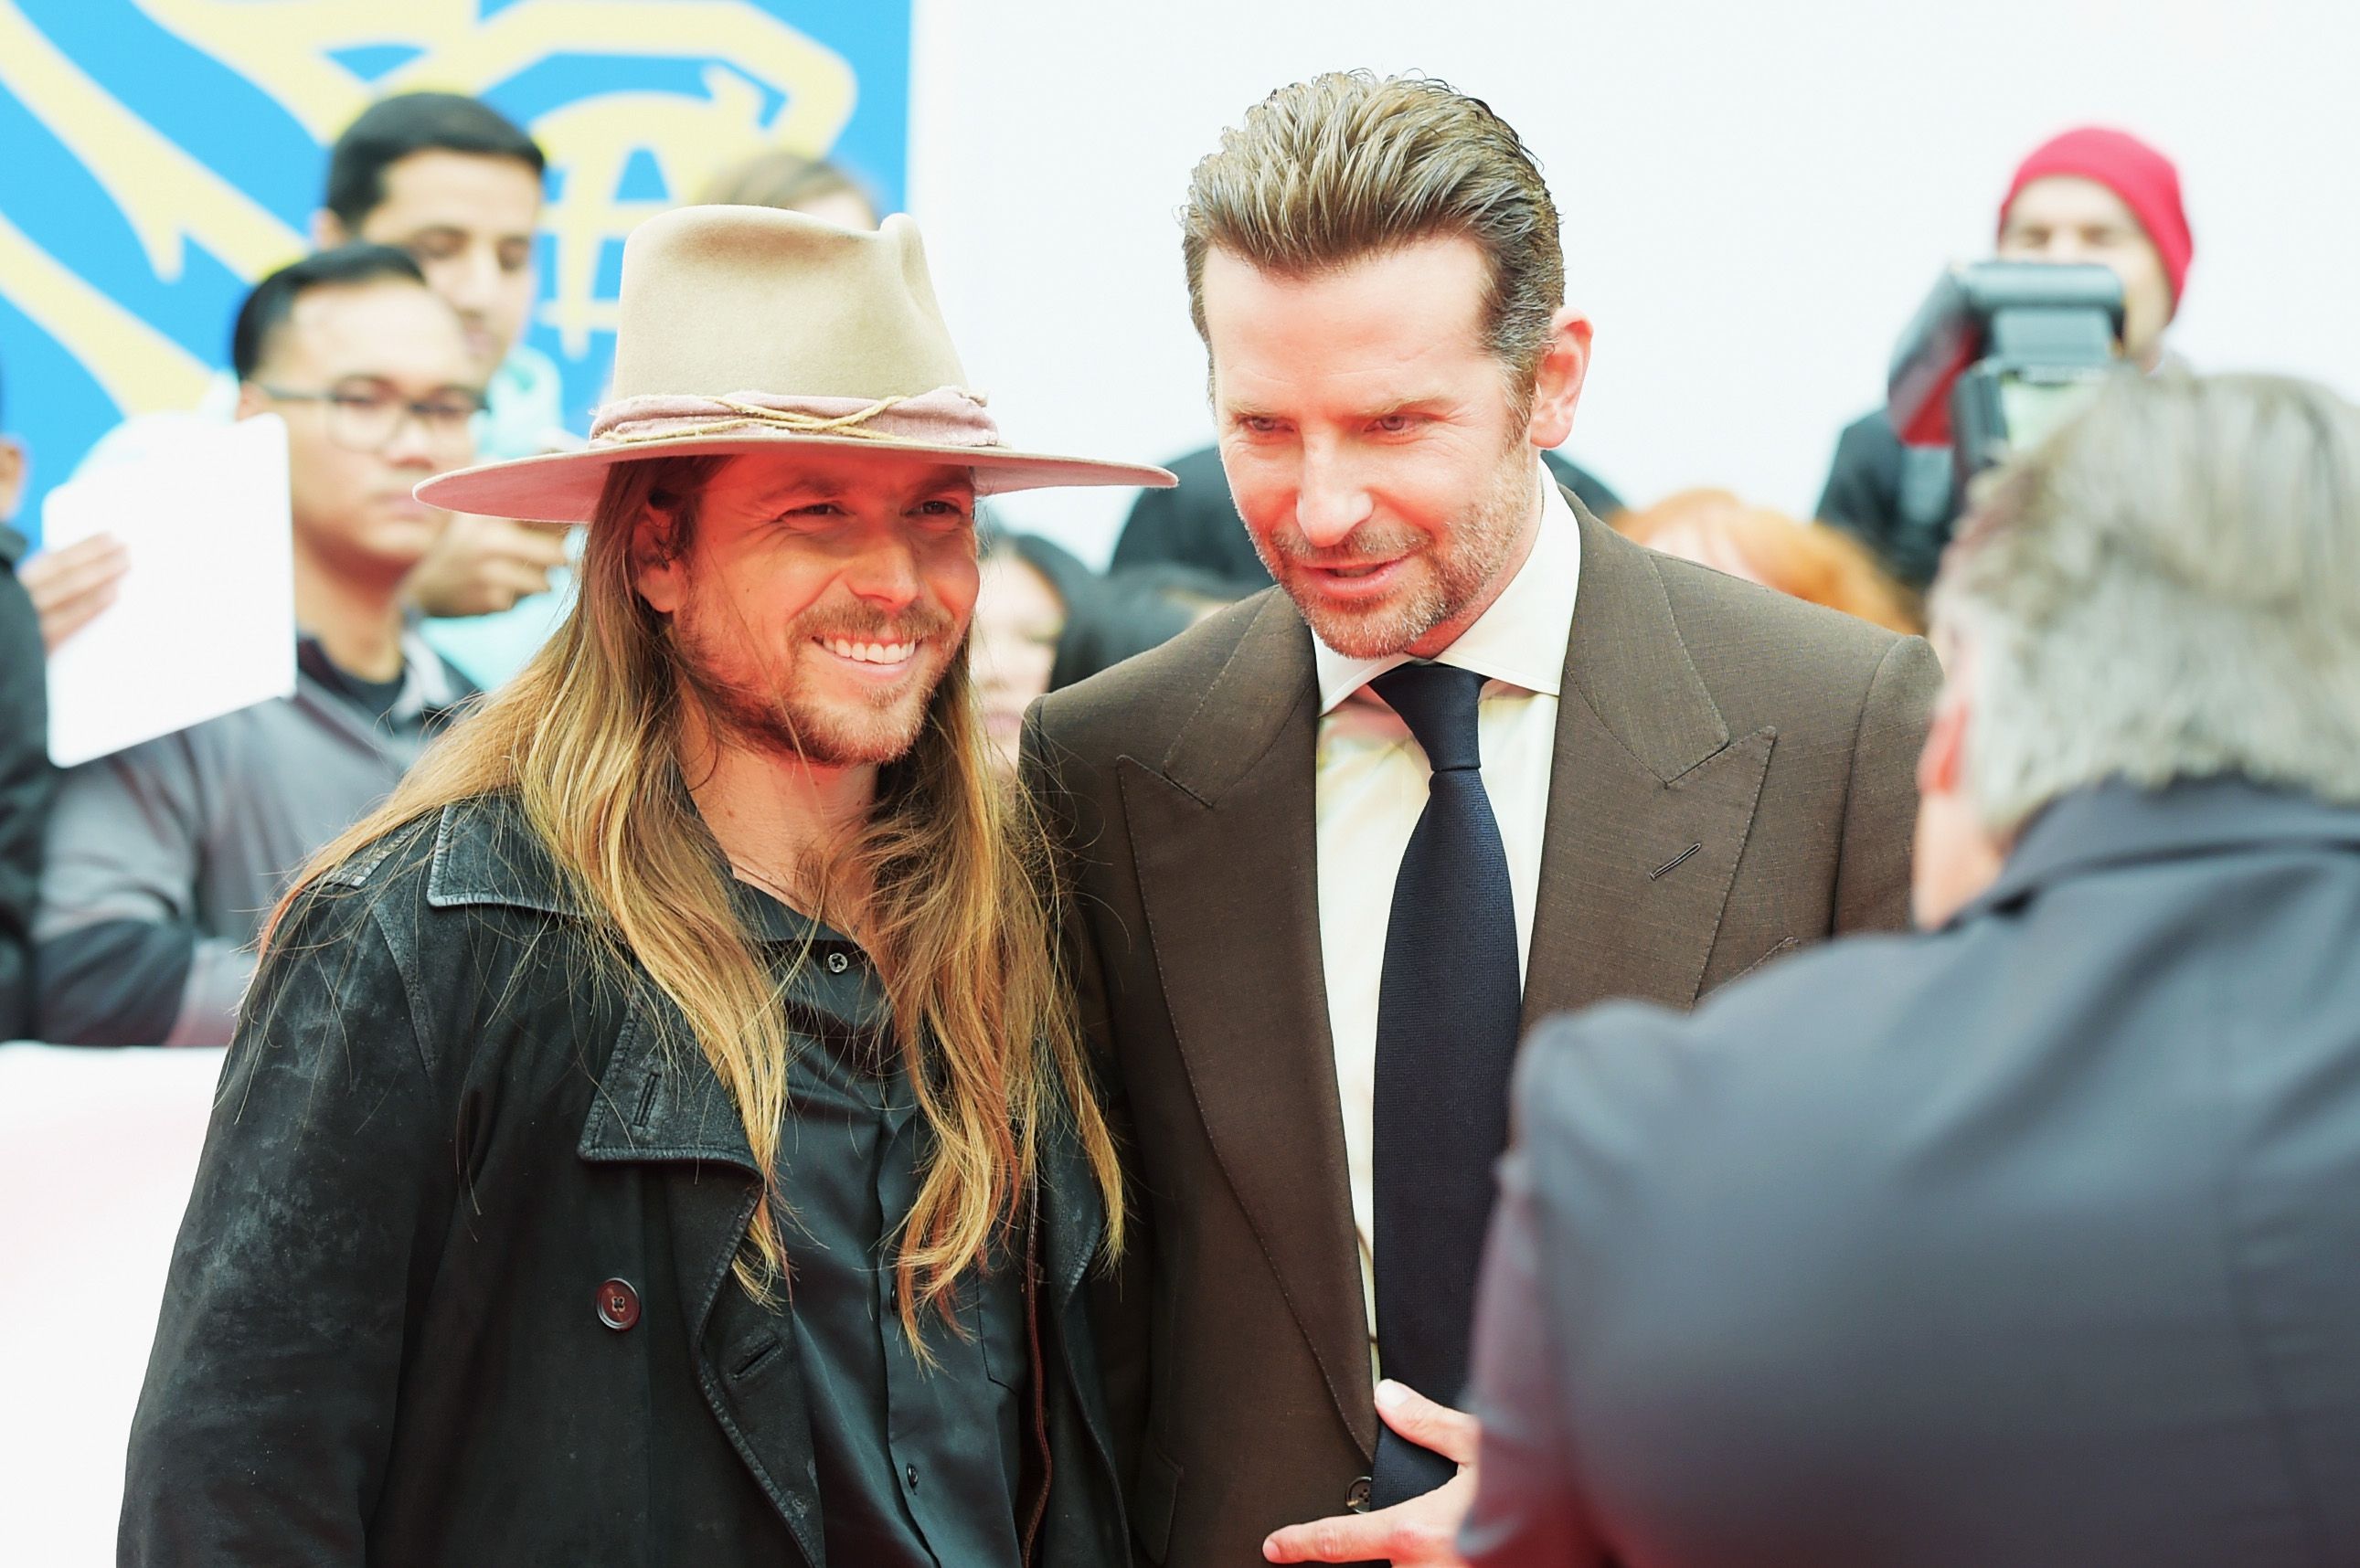 How Lukas Nelson inspired Bradley Cooper to make 'A Star Is Born